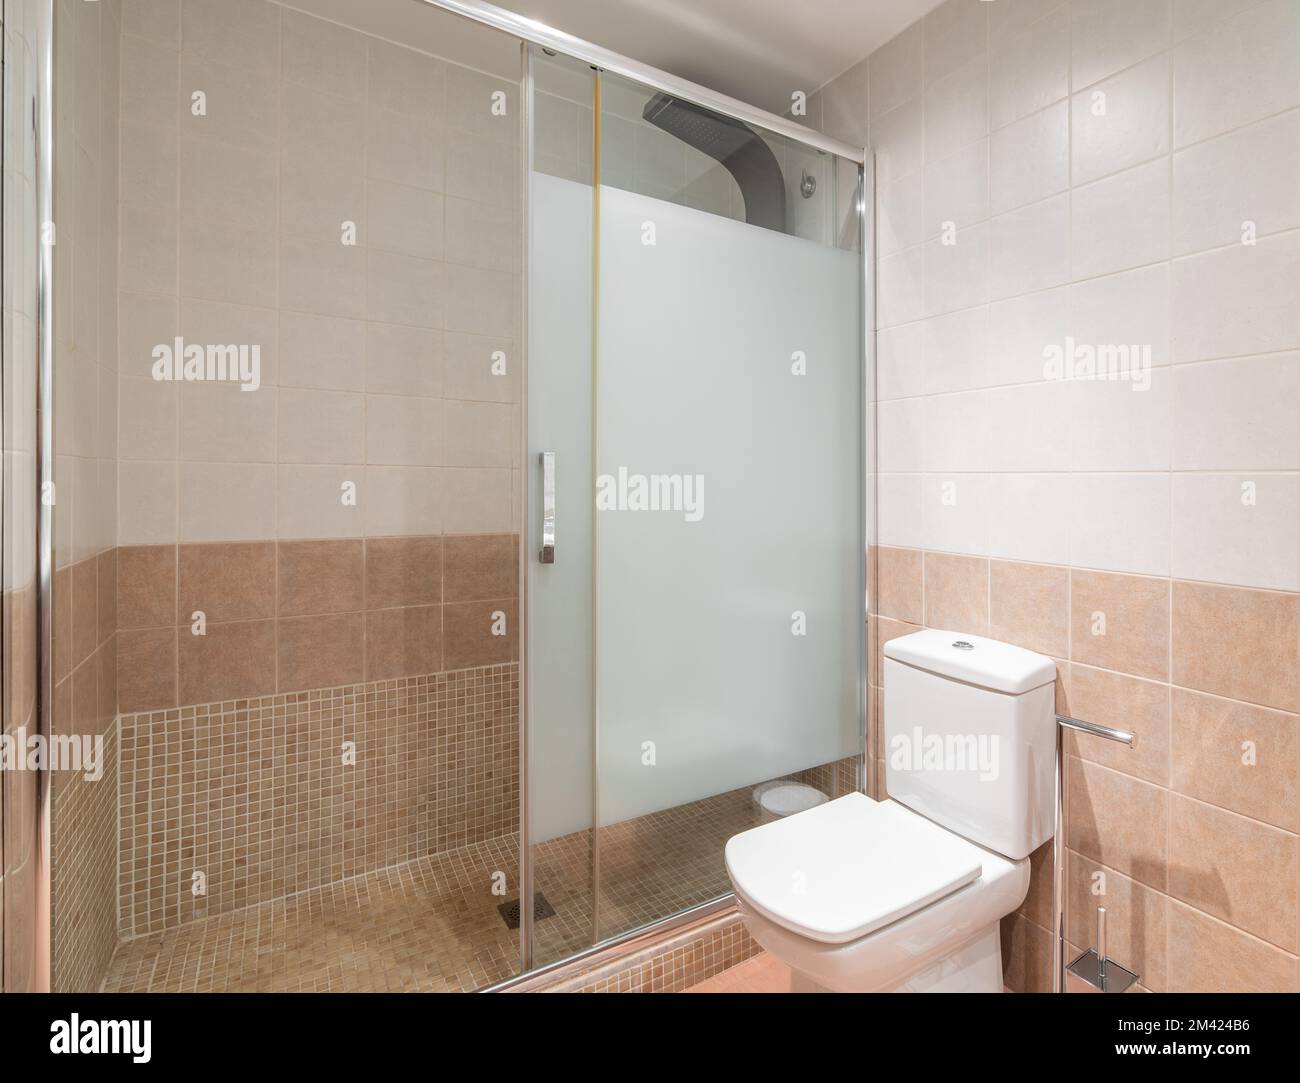 Shower area is separated from shared bathroom by sliding partition made of frosted durable glass. Walls of room are tiled in delicate neutral colors Stock Photo